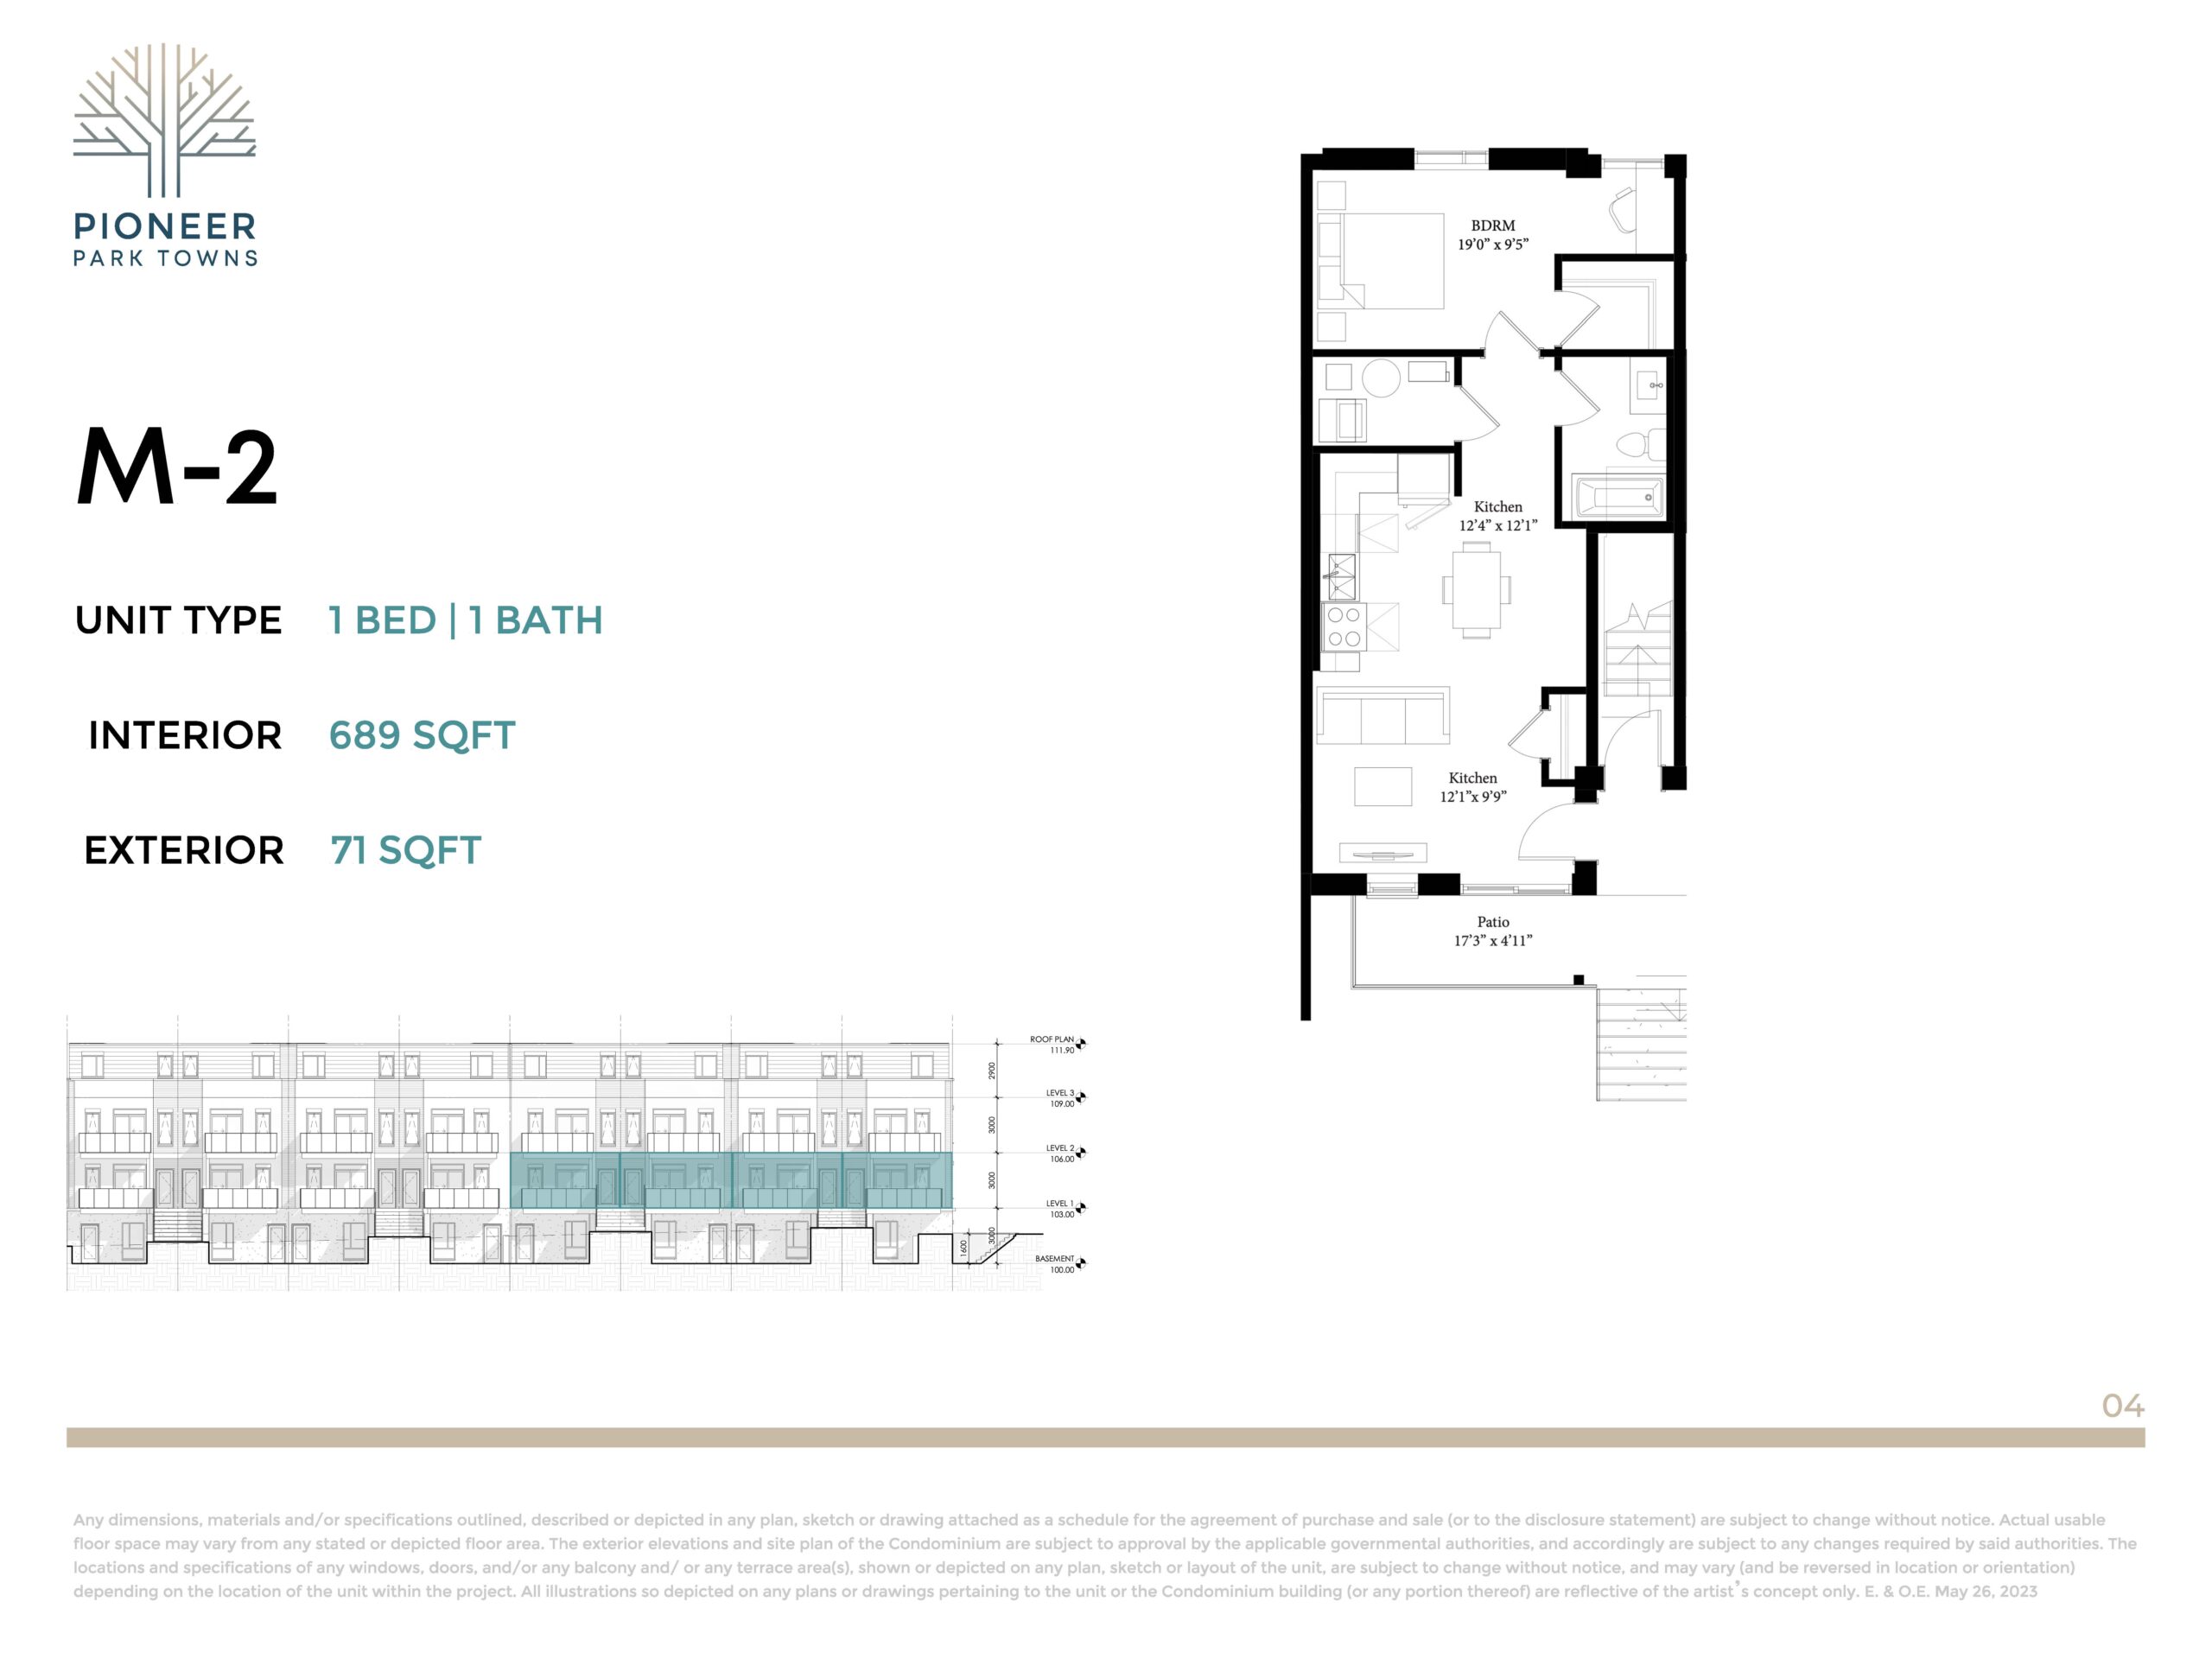  Floor Plan of Pioneer Park Towns with undefined beds